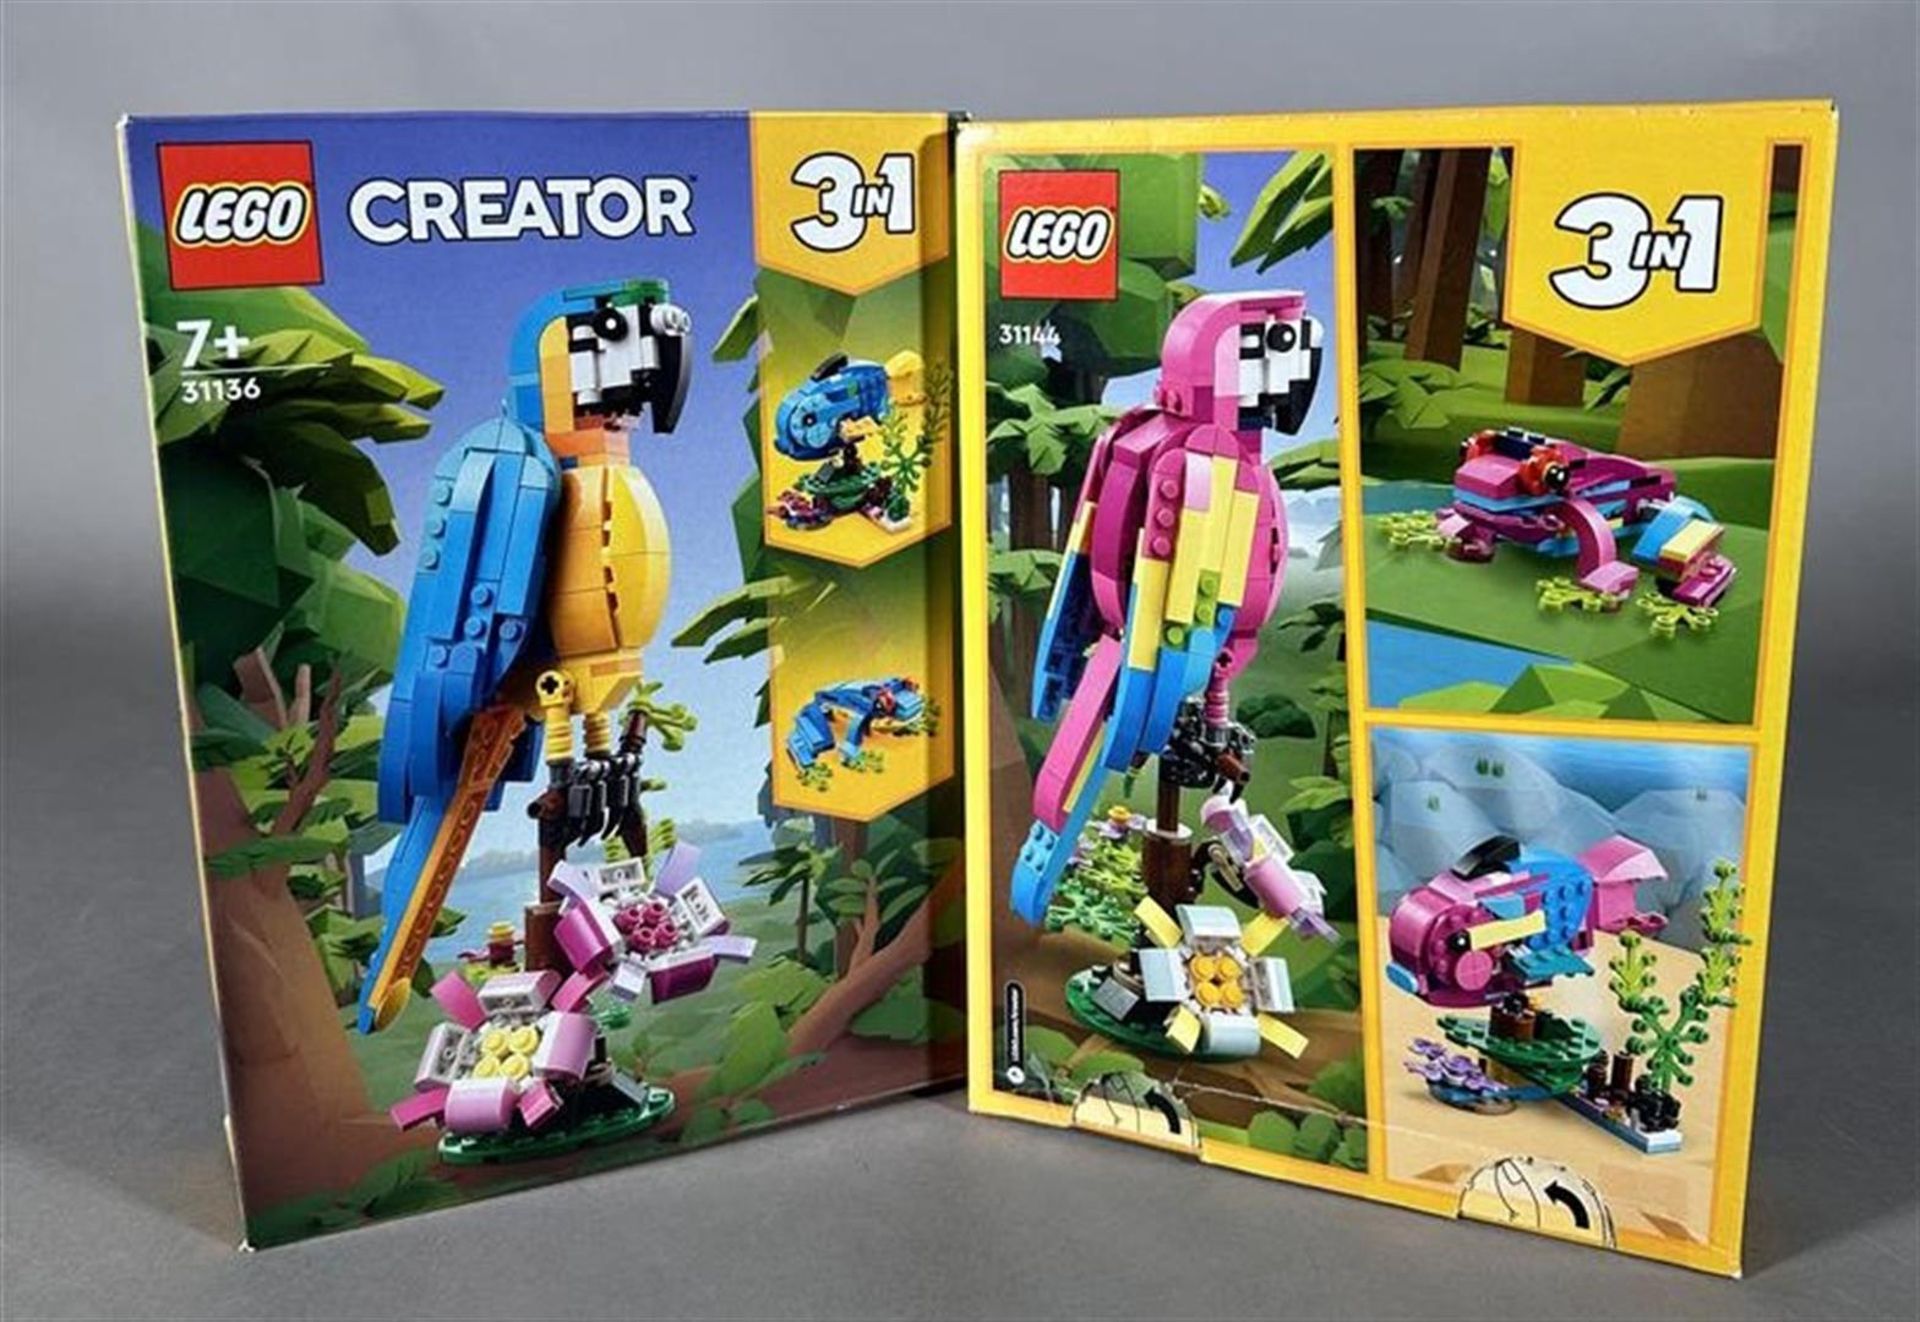 Lego creator 'blue' exotic parrot 31136; Lego creator 'pink' exotic parrot 6442319. (2x) - Image 2 of 4